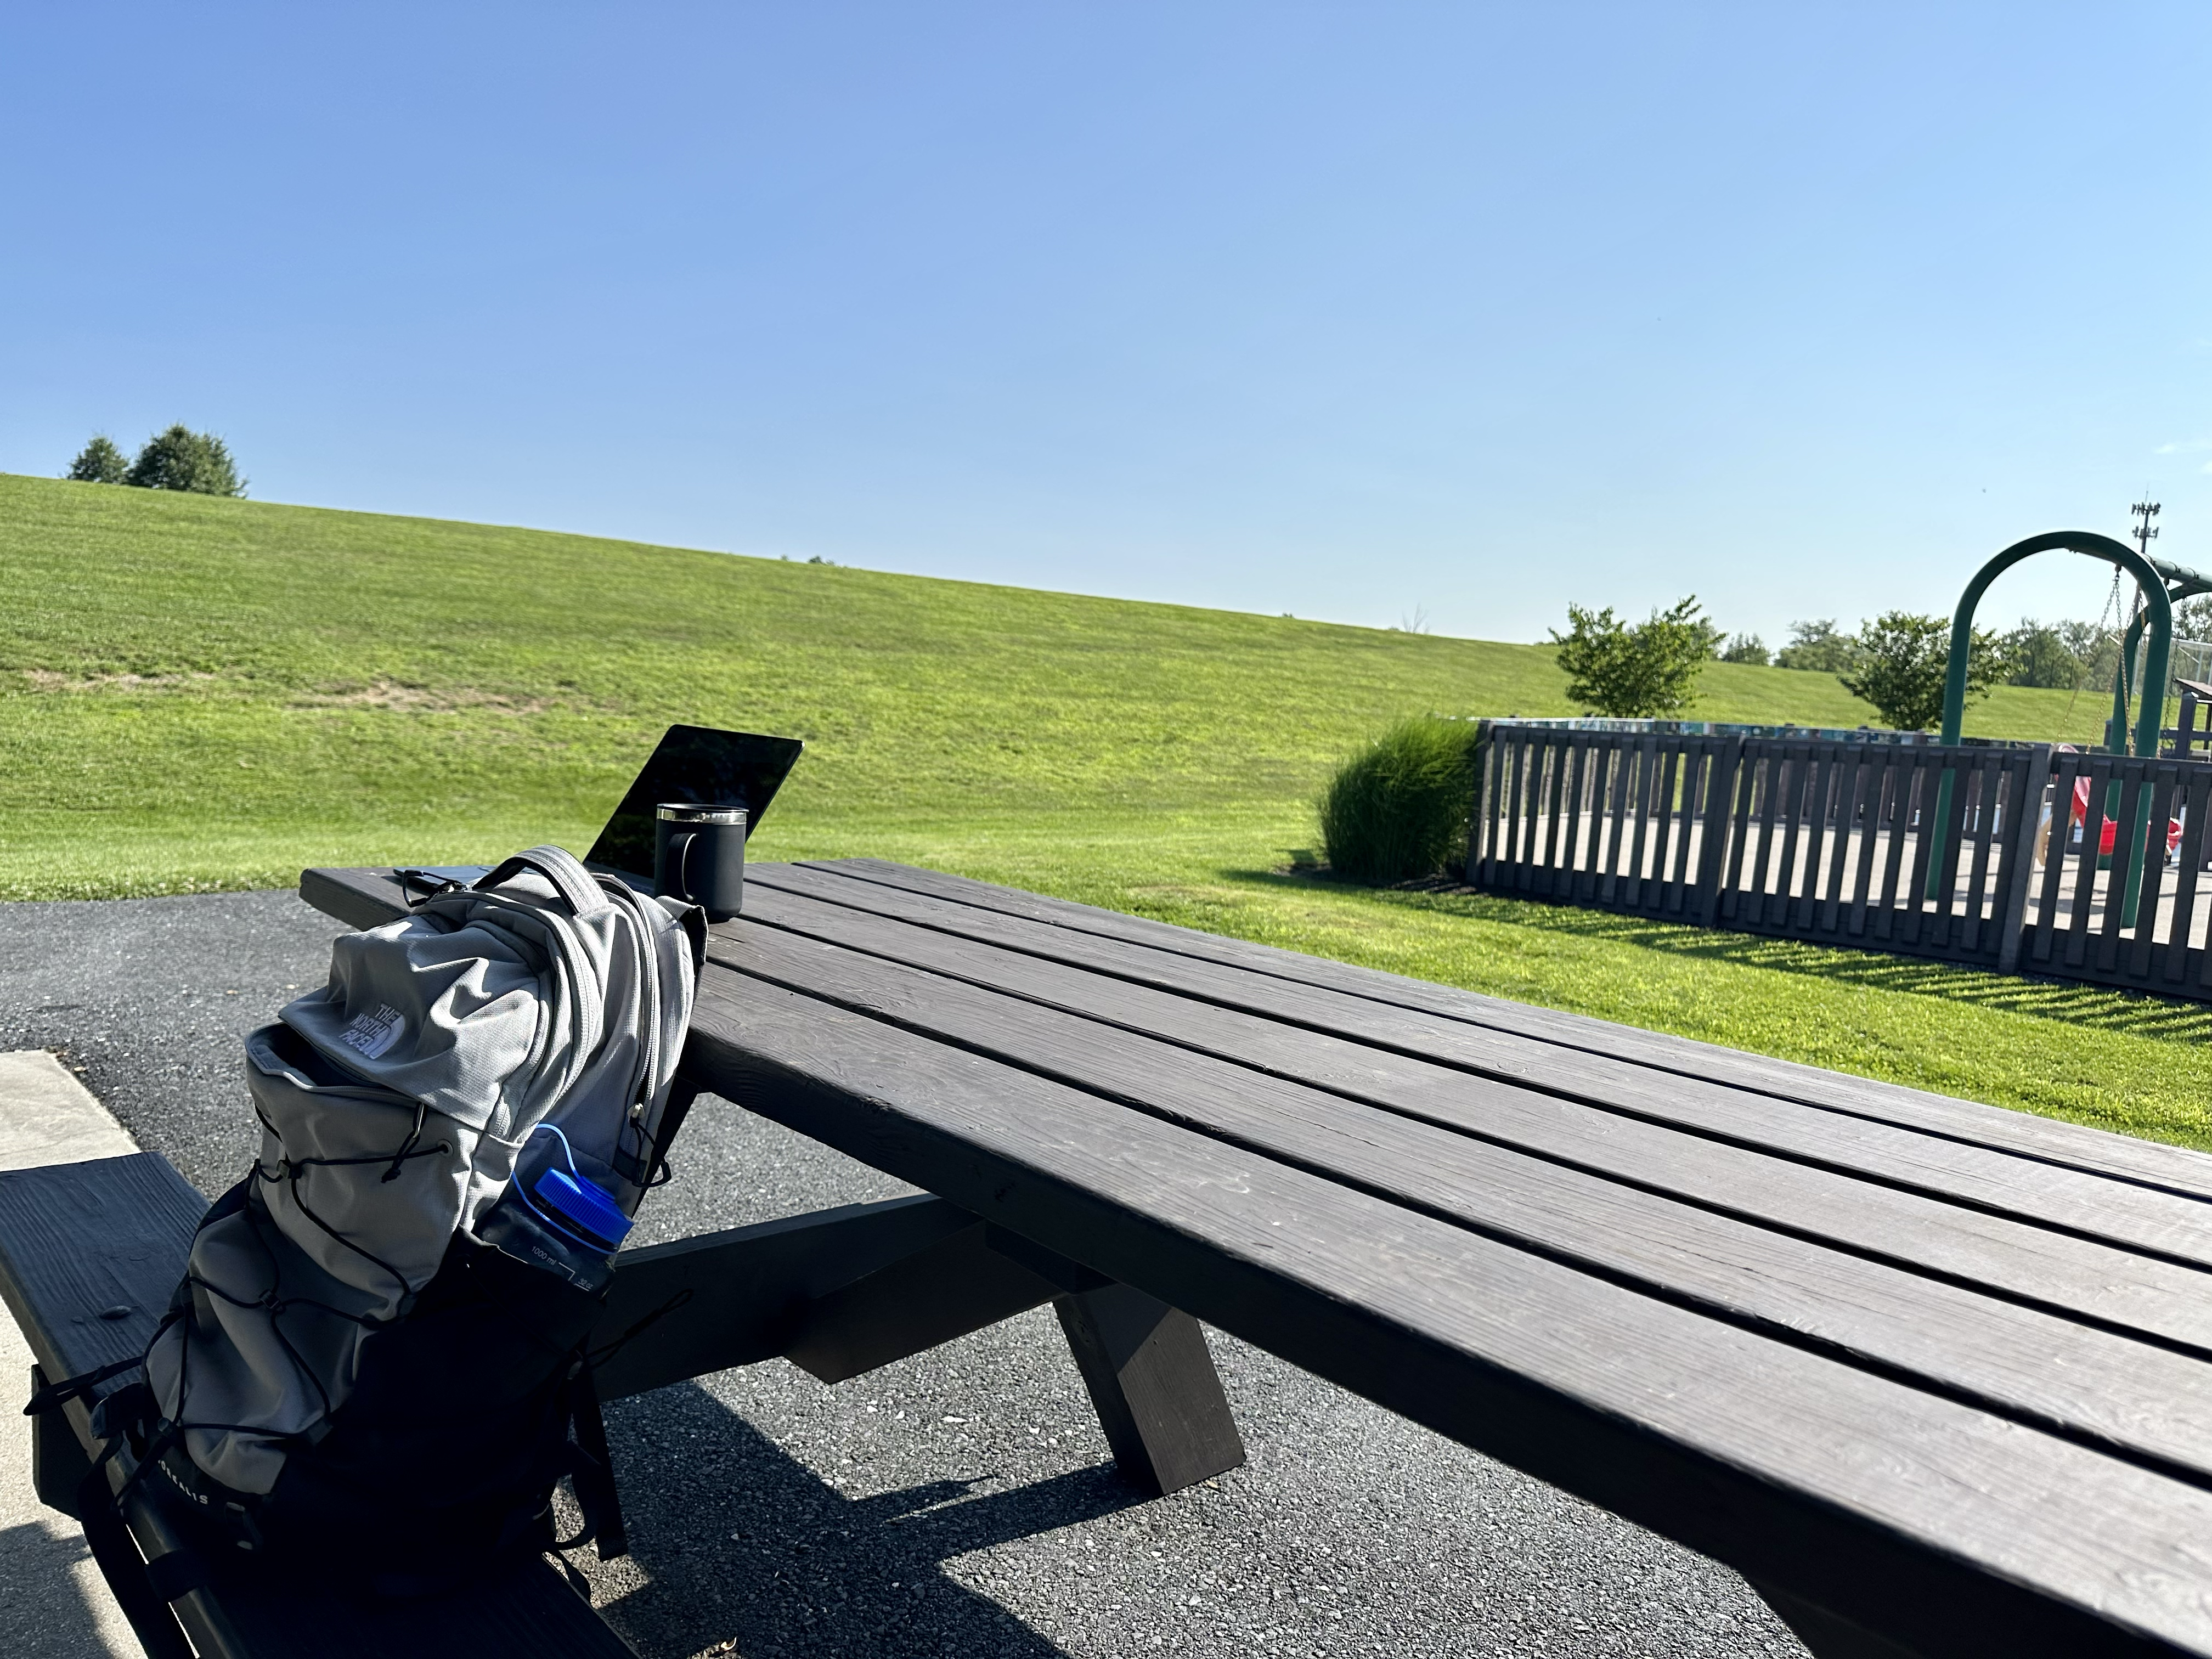 macbook air, coffee mug, and north face back pack resting on a park picnic bench, overlooking a playground on the right side of the photo and a vast green field and blue sky to the left and above.